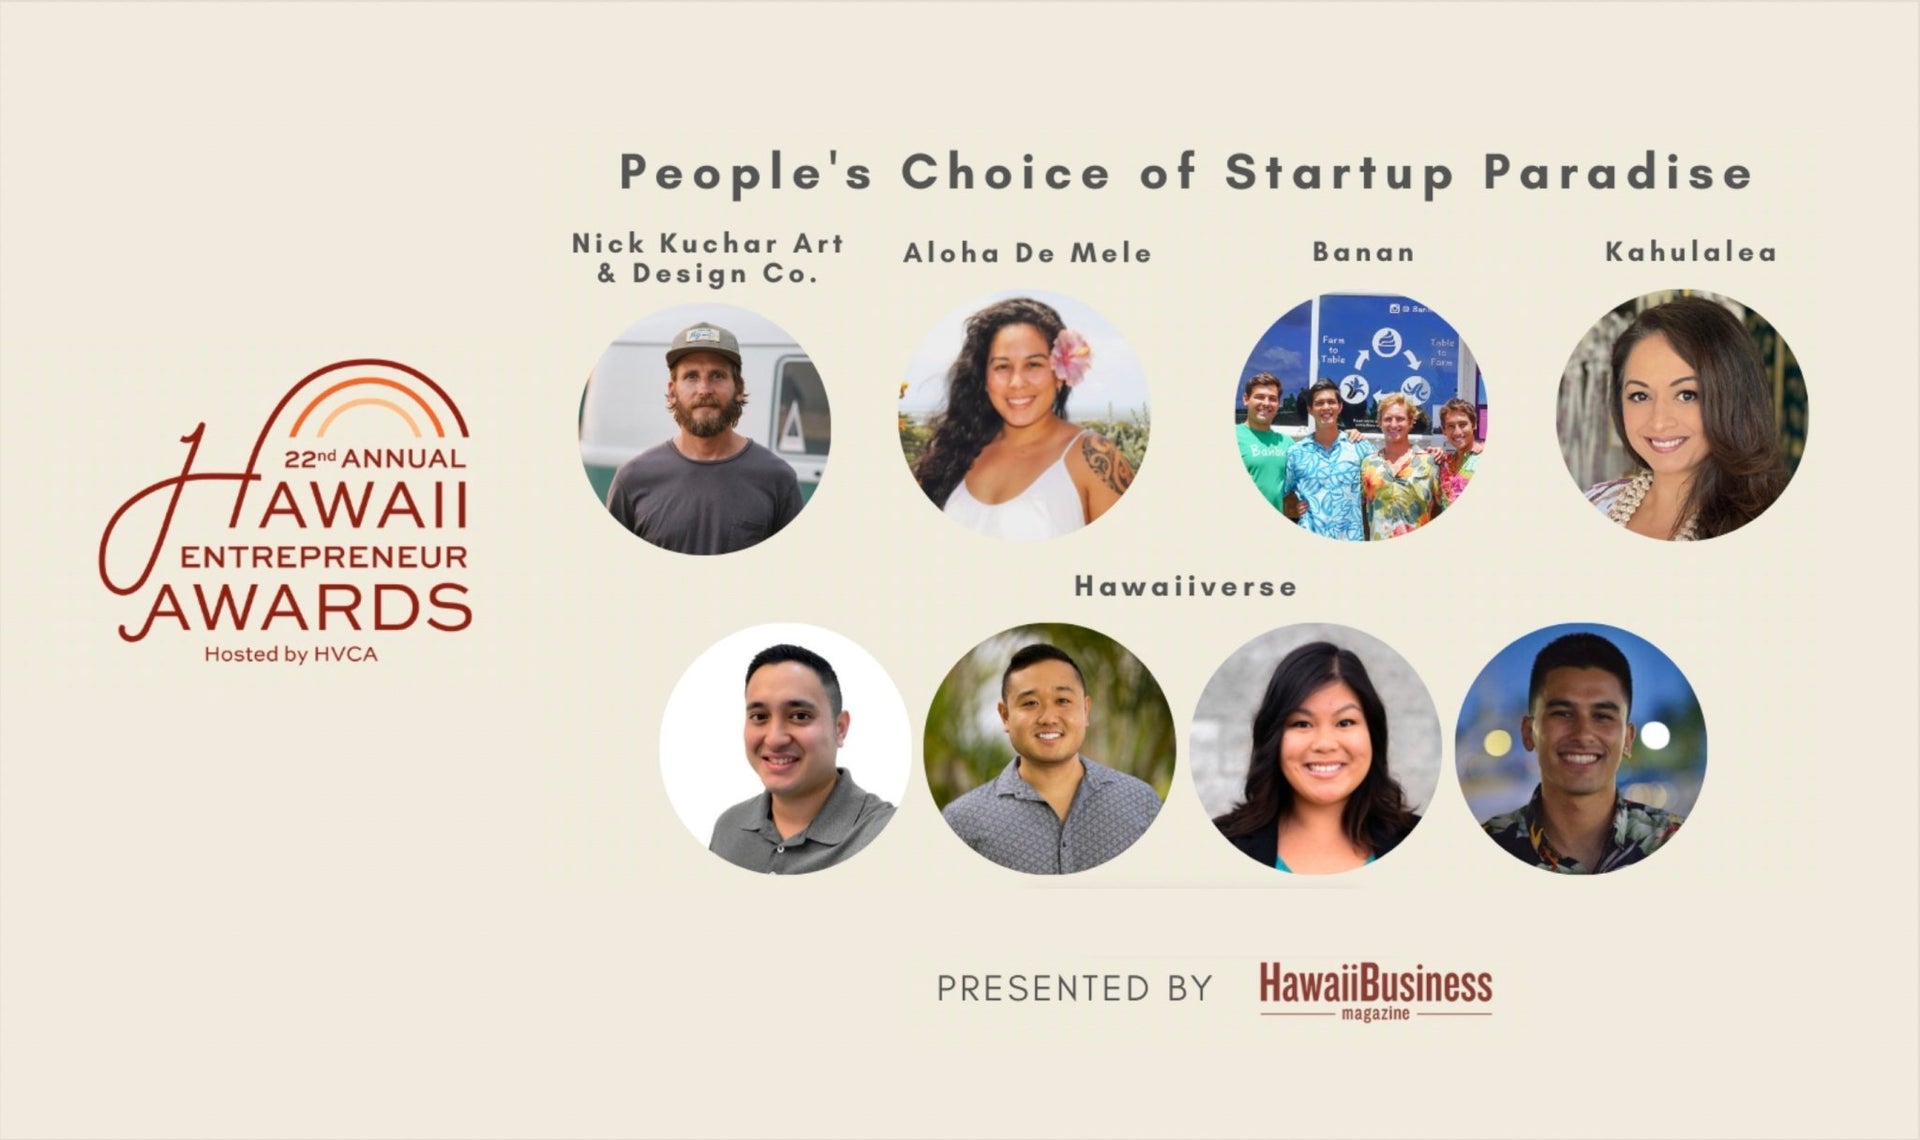 Nick Kuchar Art & Design Co. Nominated for HVCA's People's Choice Award for Startup of the Year